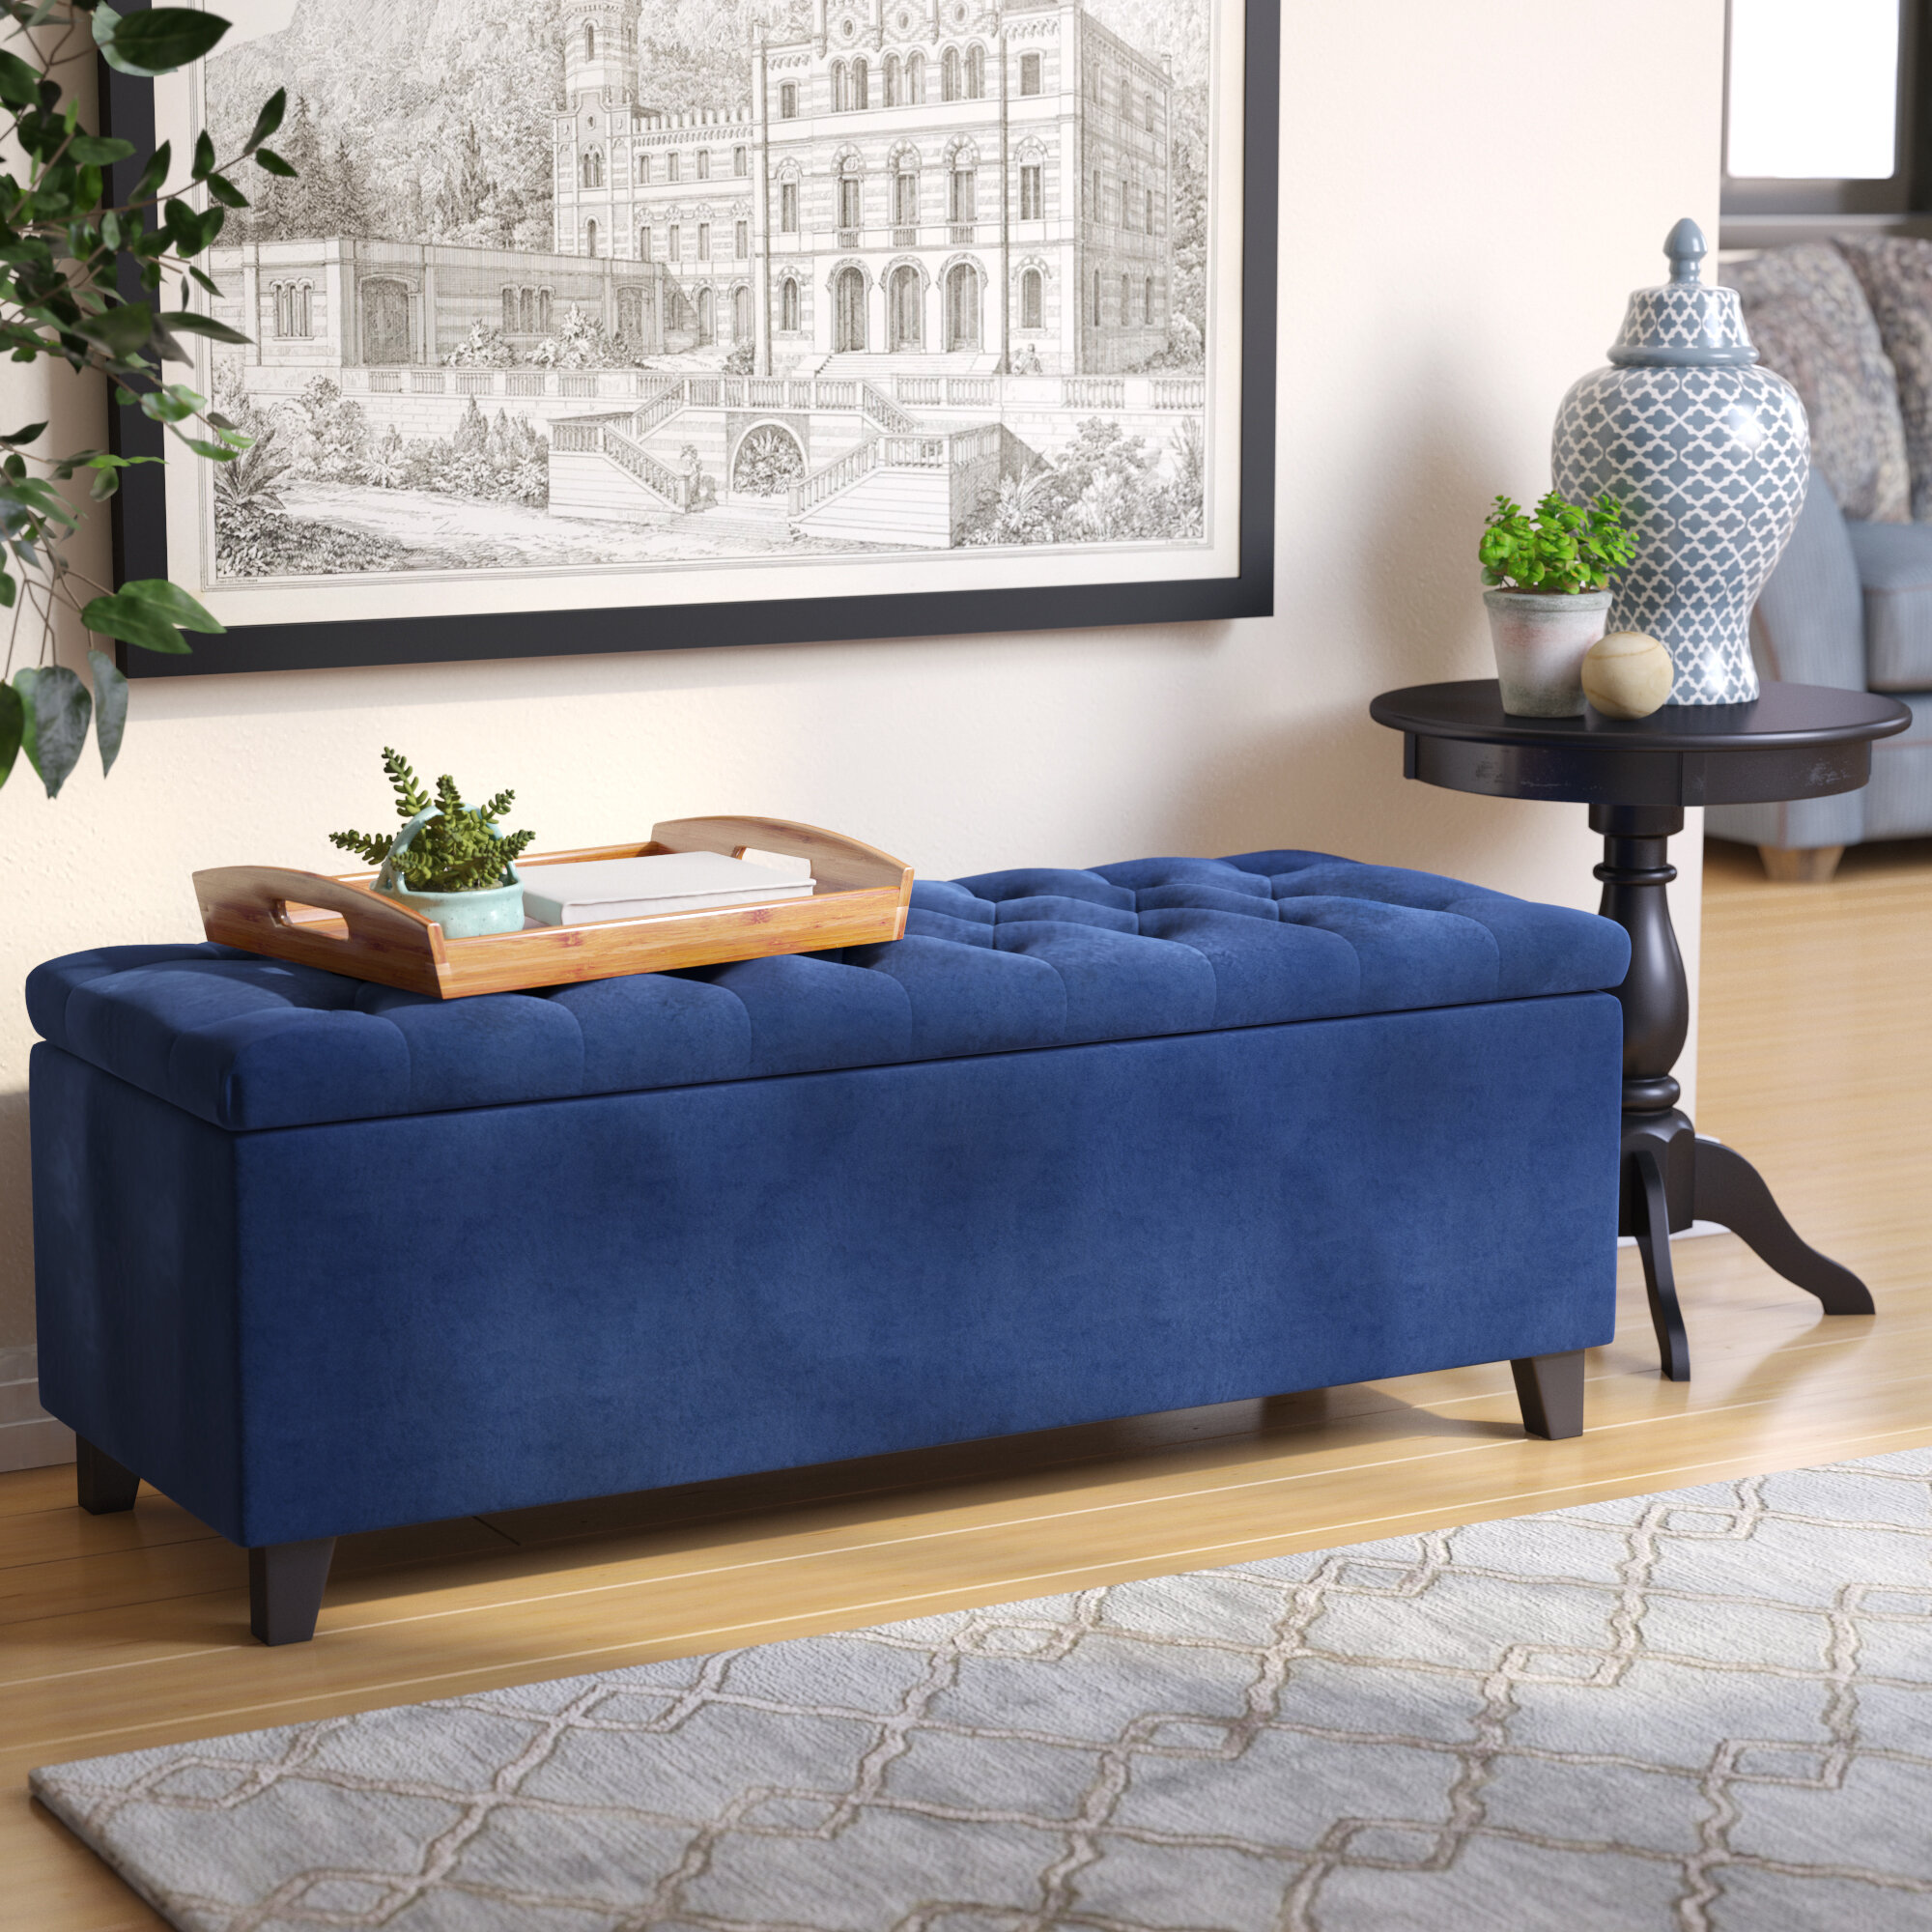 Featured image of post Blue Velvet Storage Bench - Our storage bench combines functionality and style for your living room or bedroom.